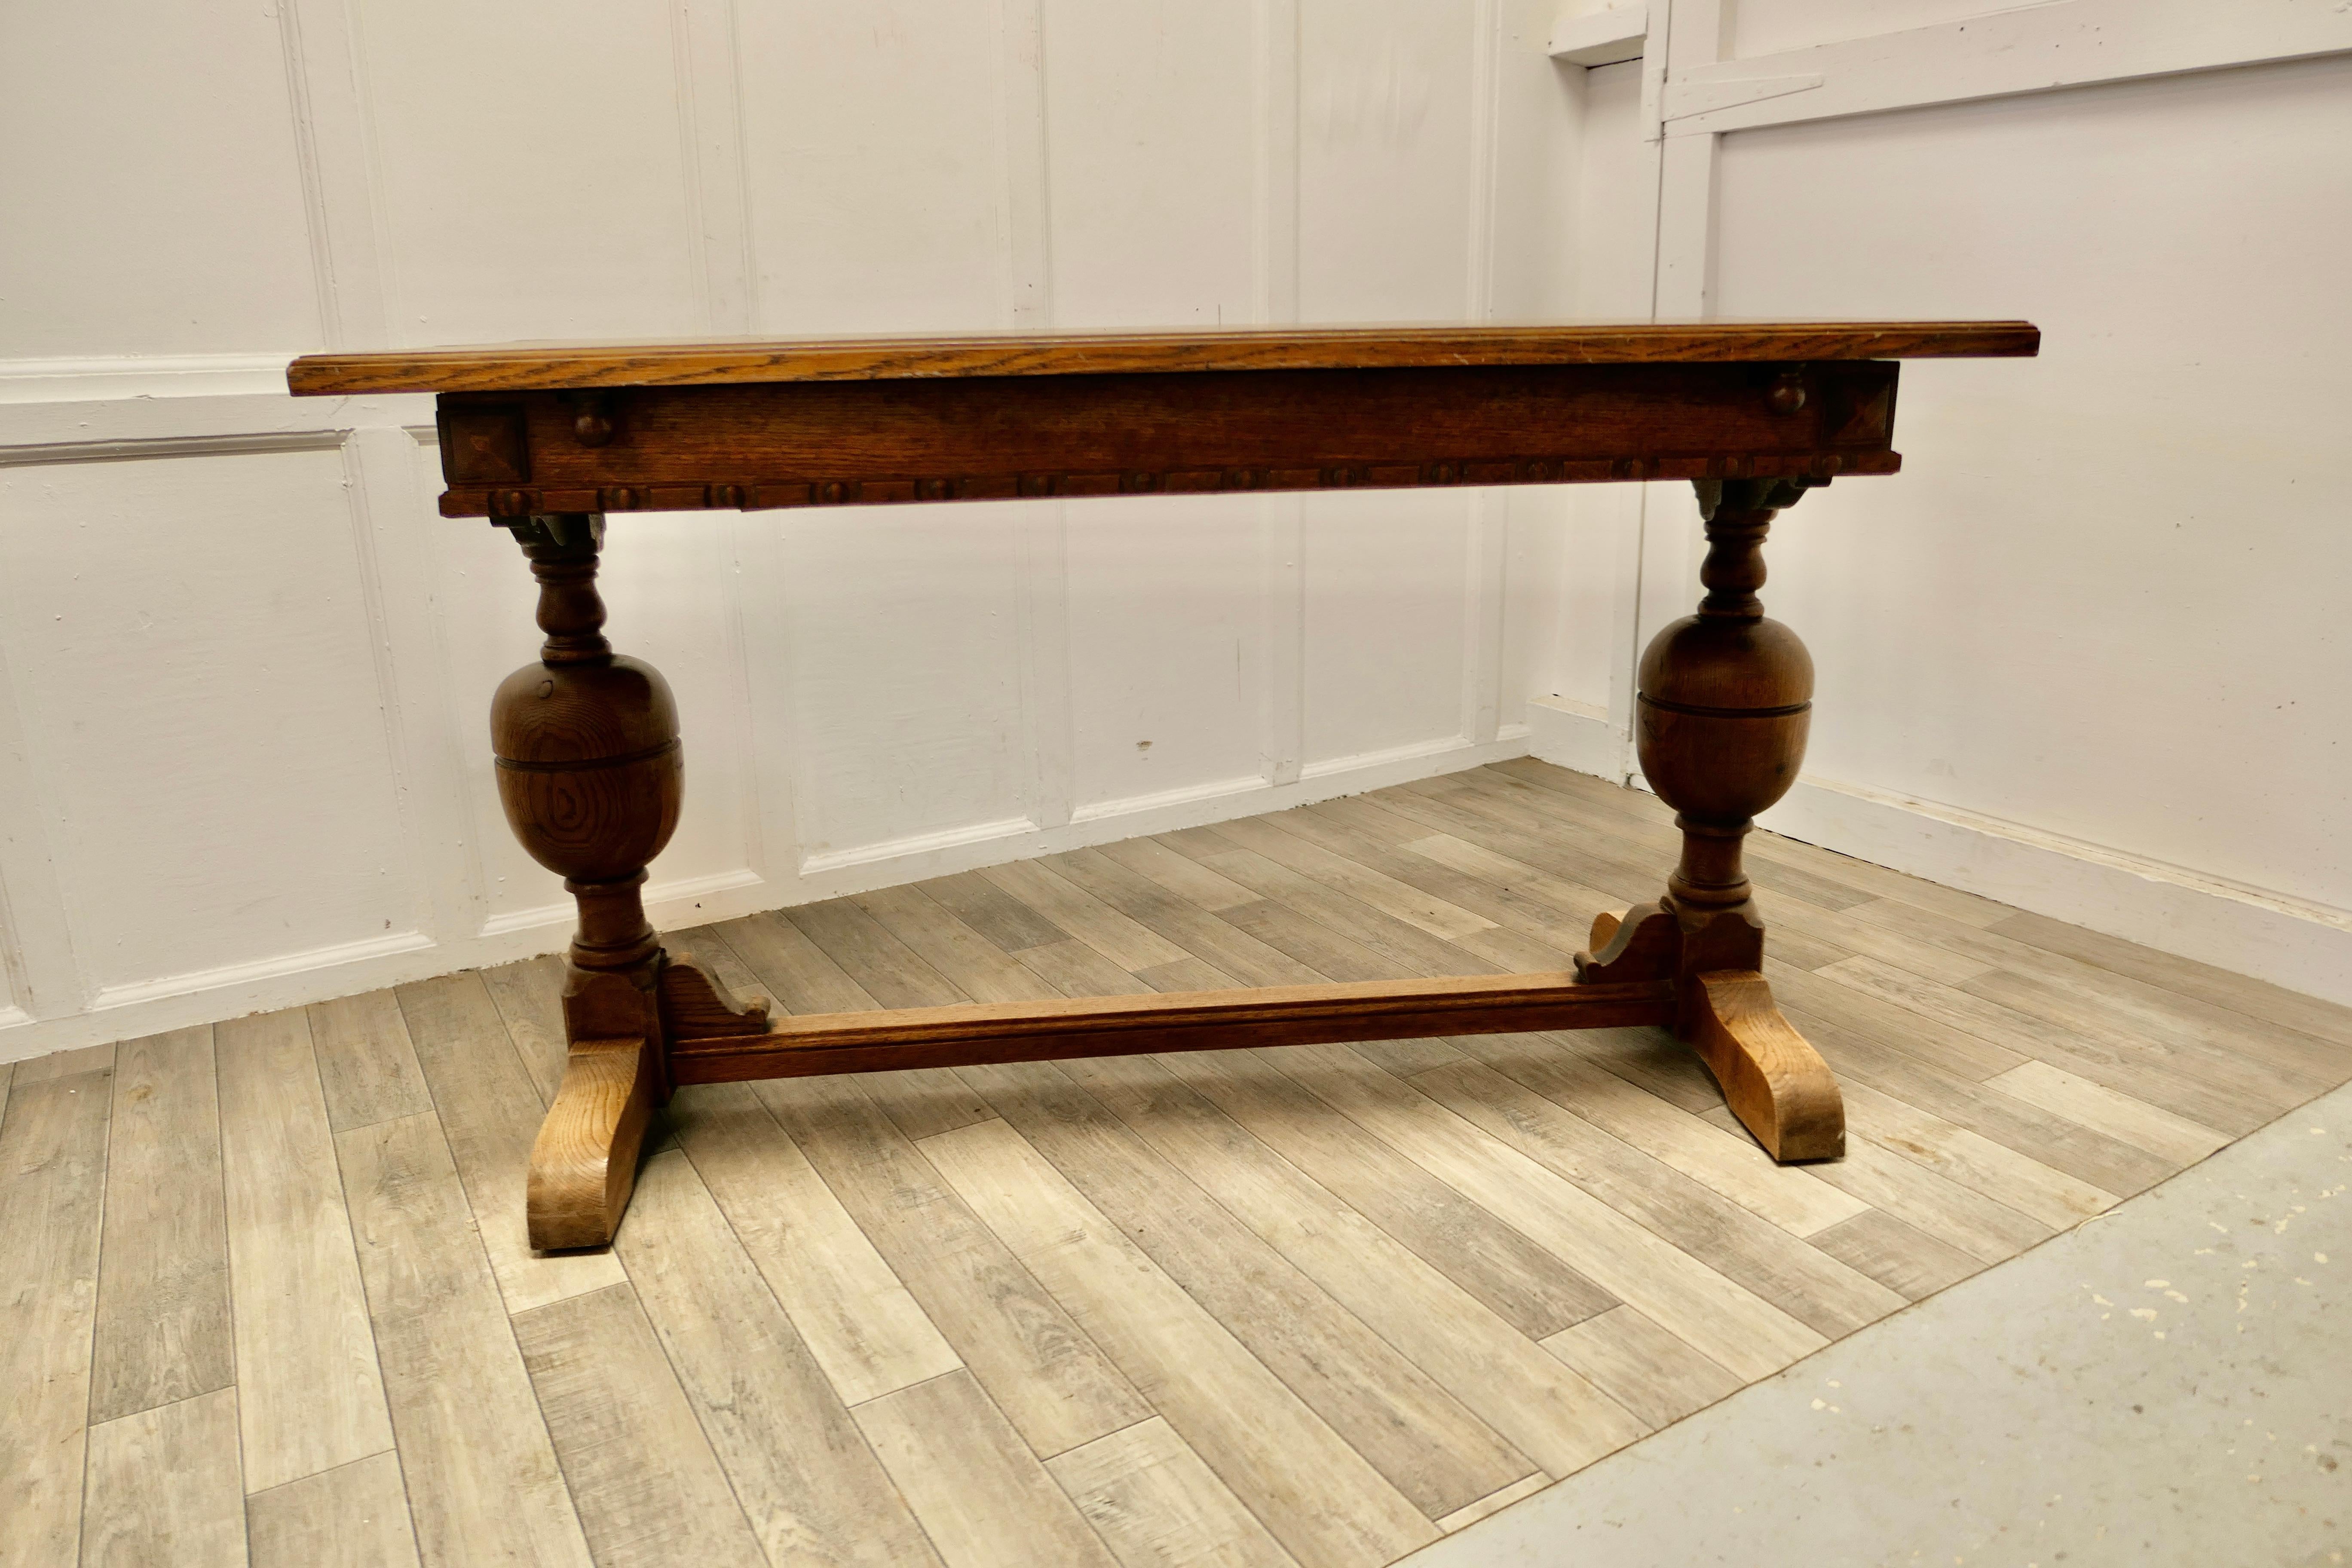 Extending oak refectory dining table.

This is a good sturdy table and at first glance it looks like an ordinary Oak refectory dining table with chunky bulbous legs and carved apron but it is narrower than normal. However this clever piece can be